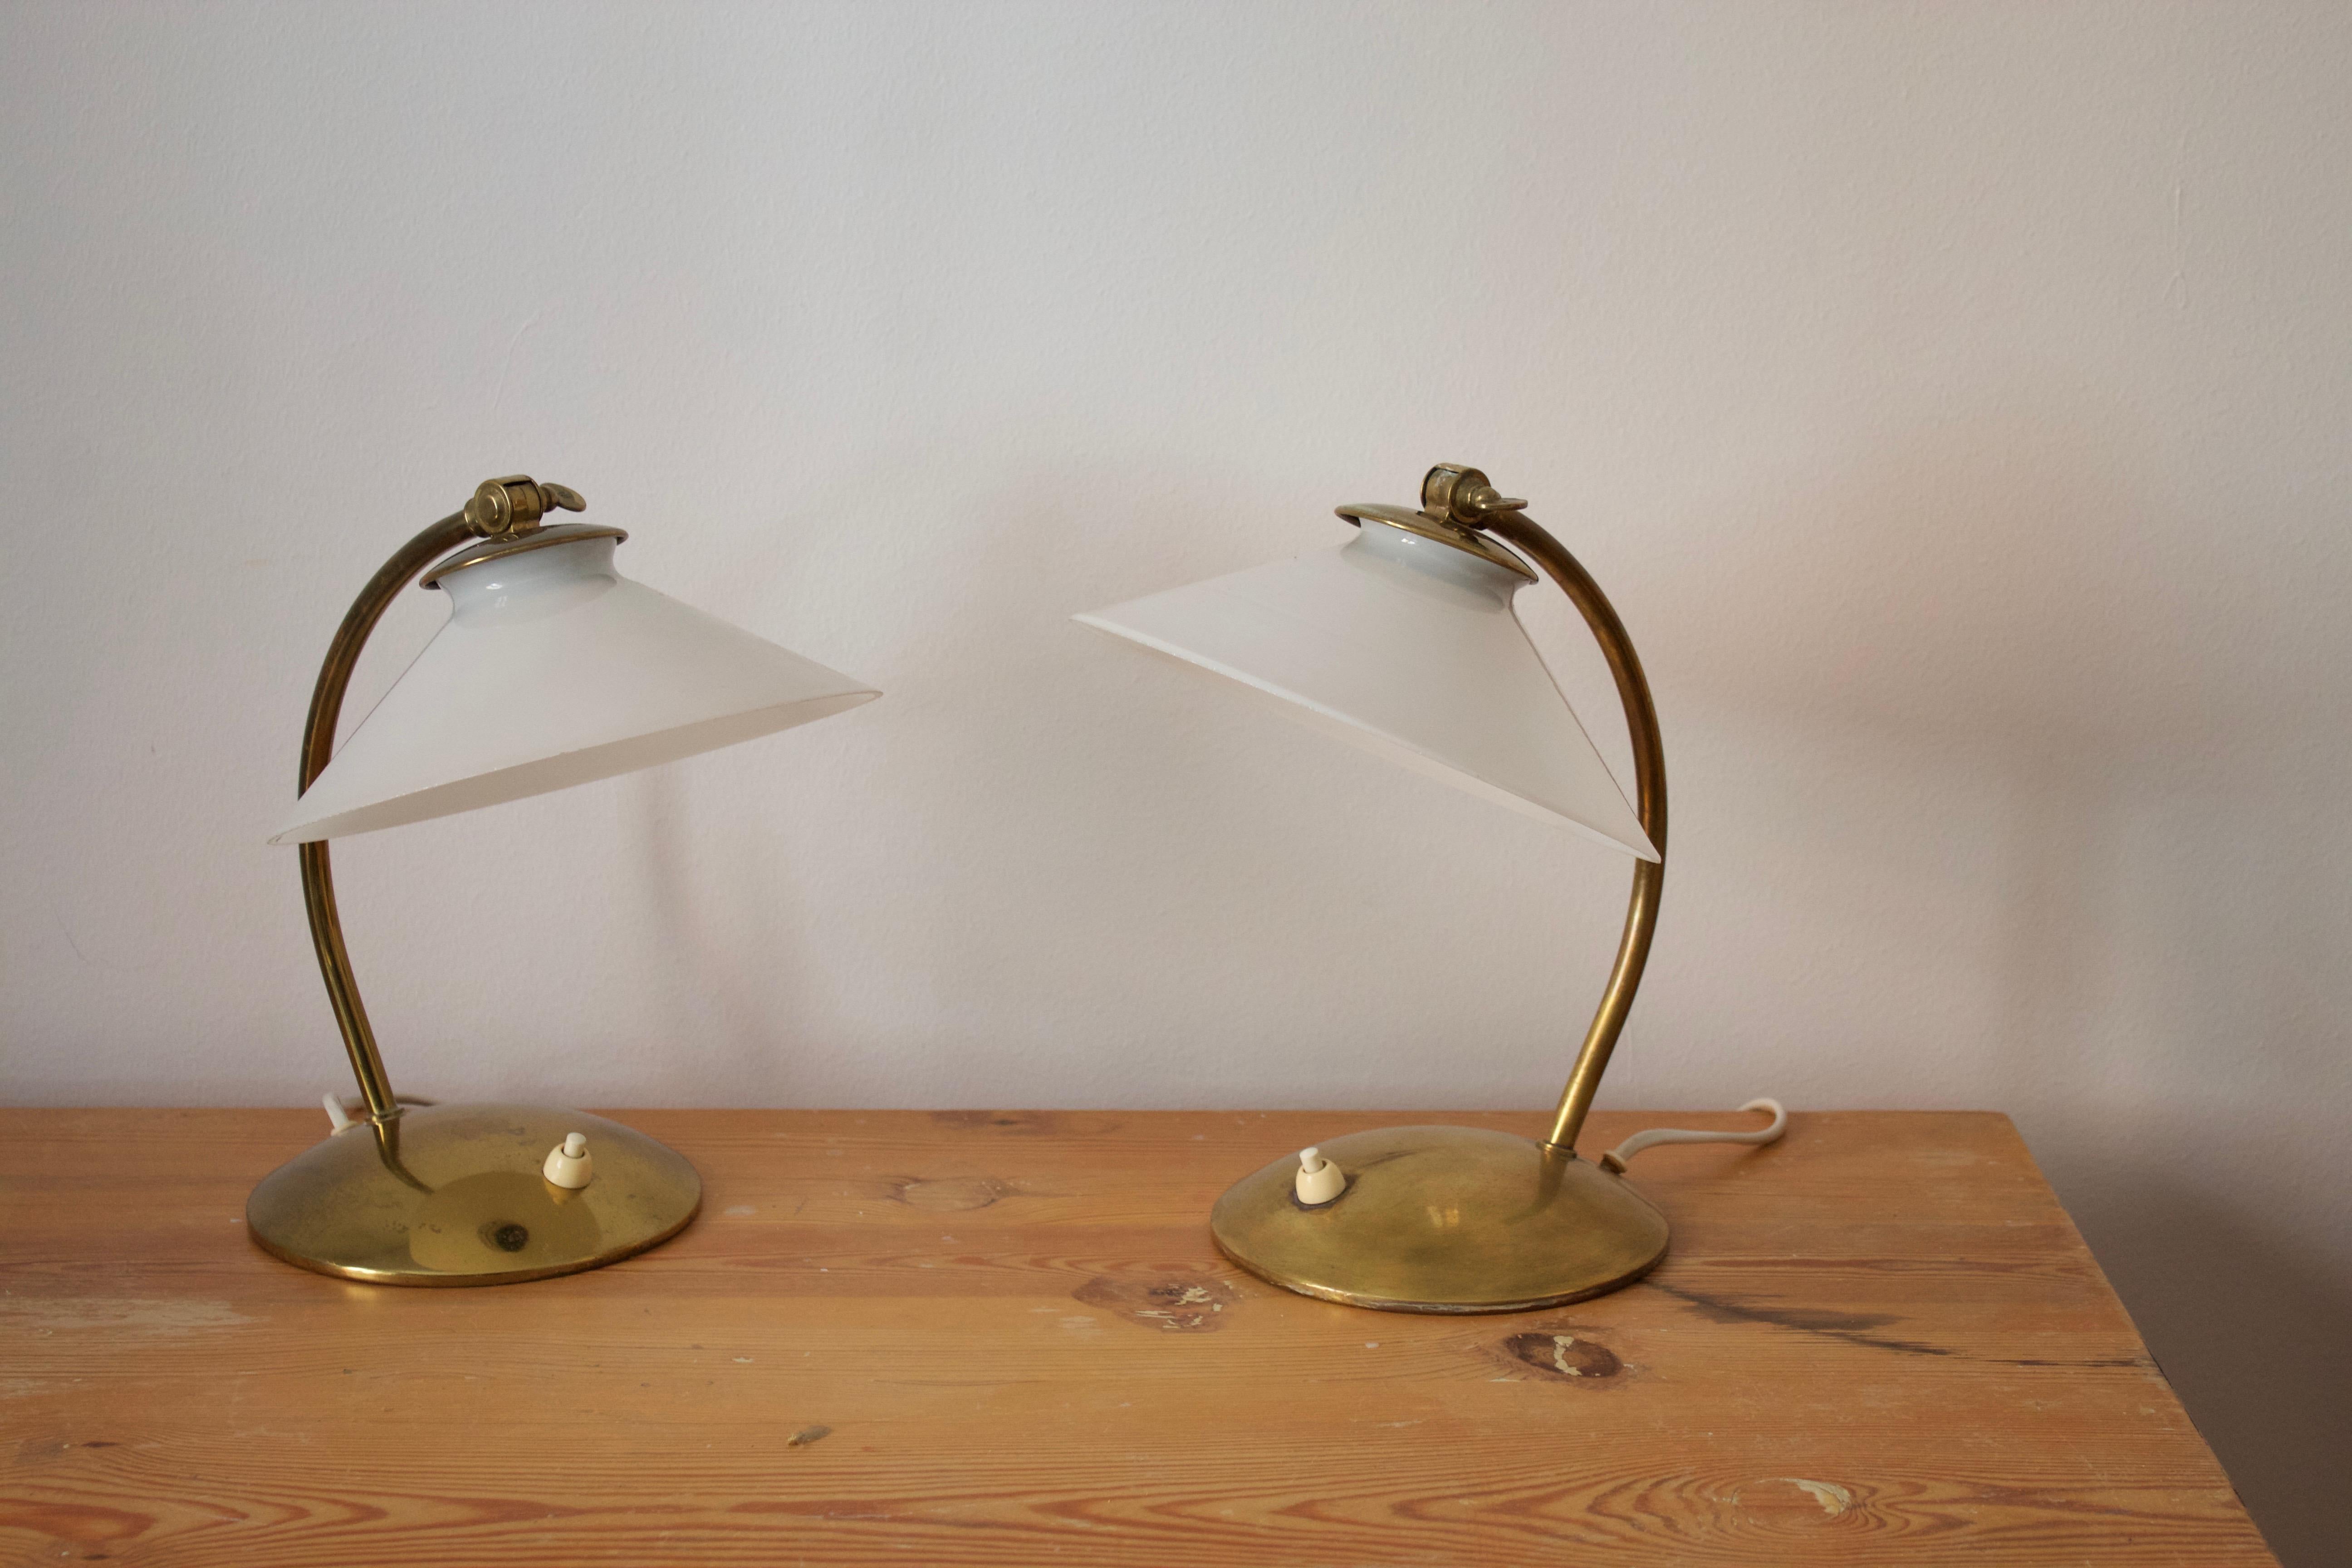 A pair of small table lamps / desk lights. With their original milk glass lampshades. Designed and produced in Sweden, 1940s.